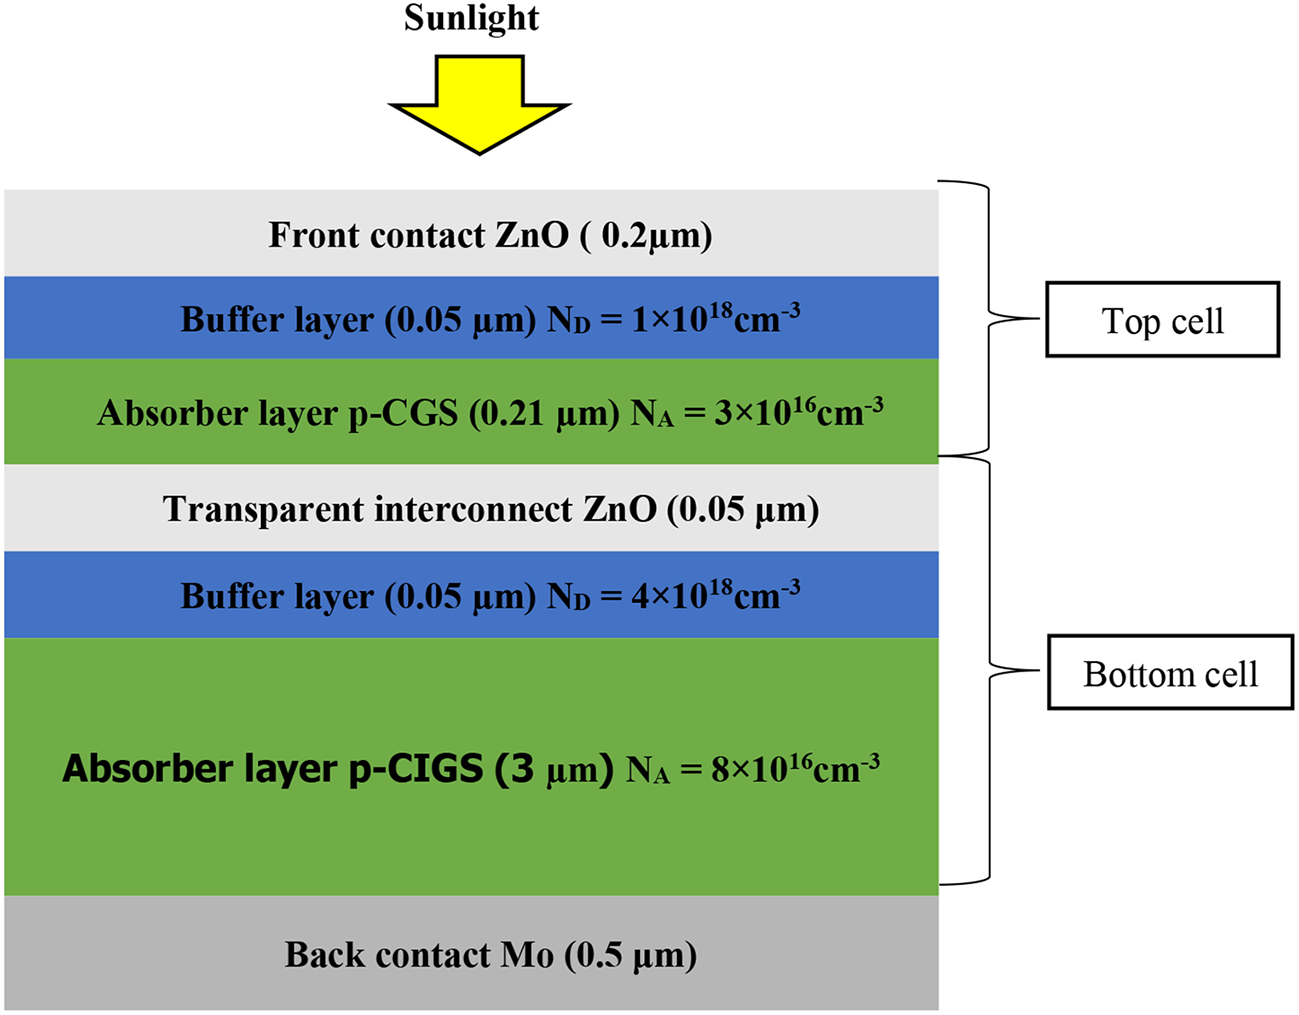 Performance Enhancement of CGS/CIGS Thin Flm Tandem Solar Cell Using Different Buffer Layers